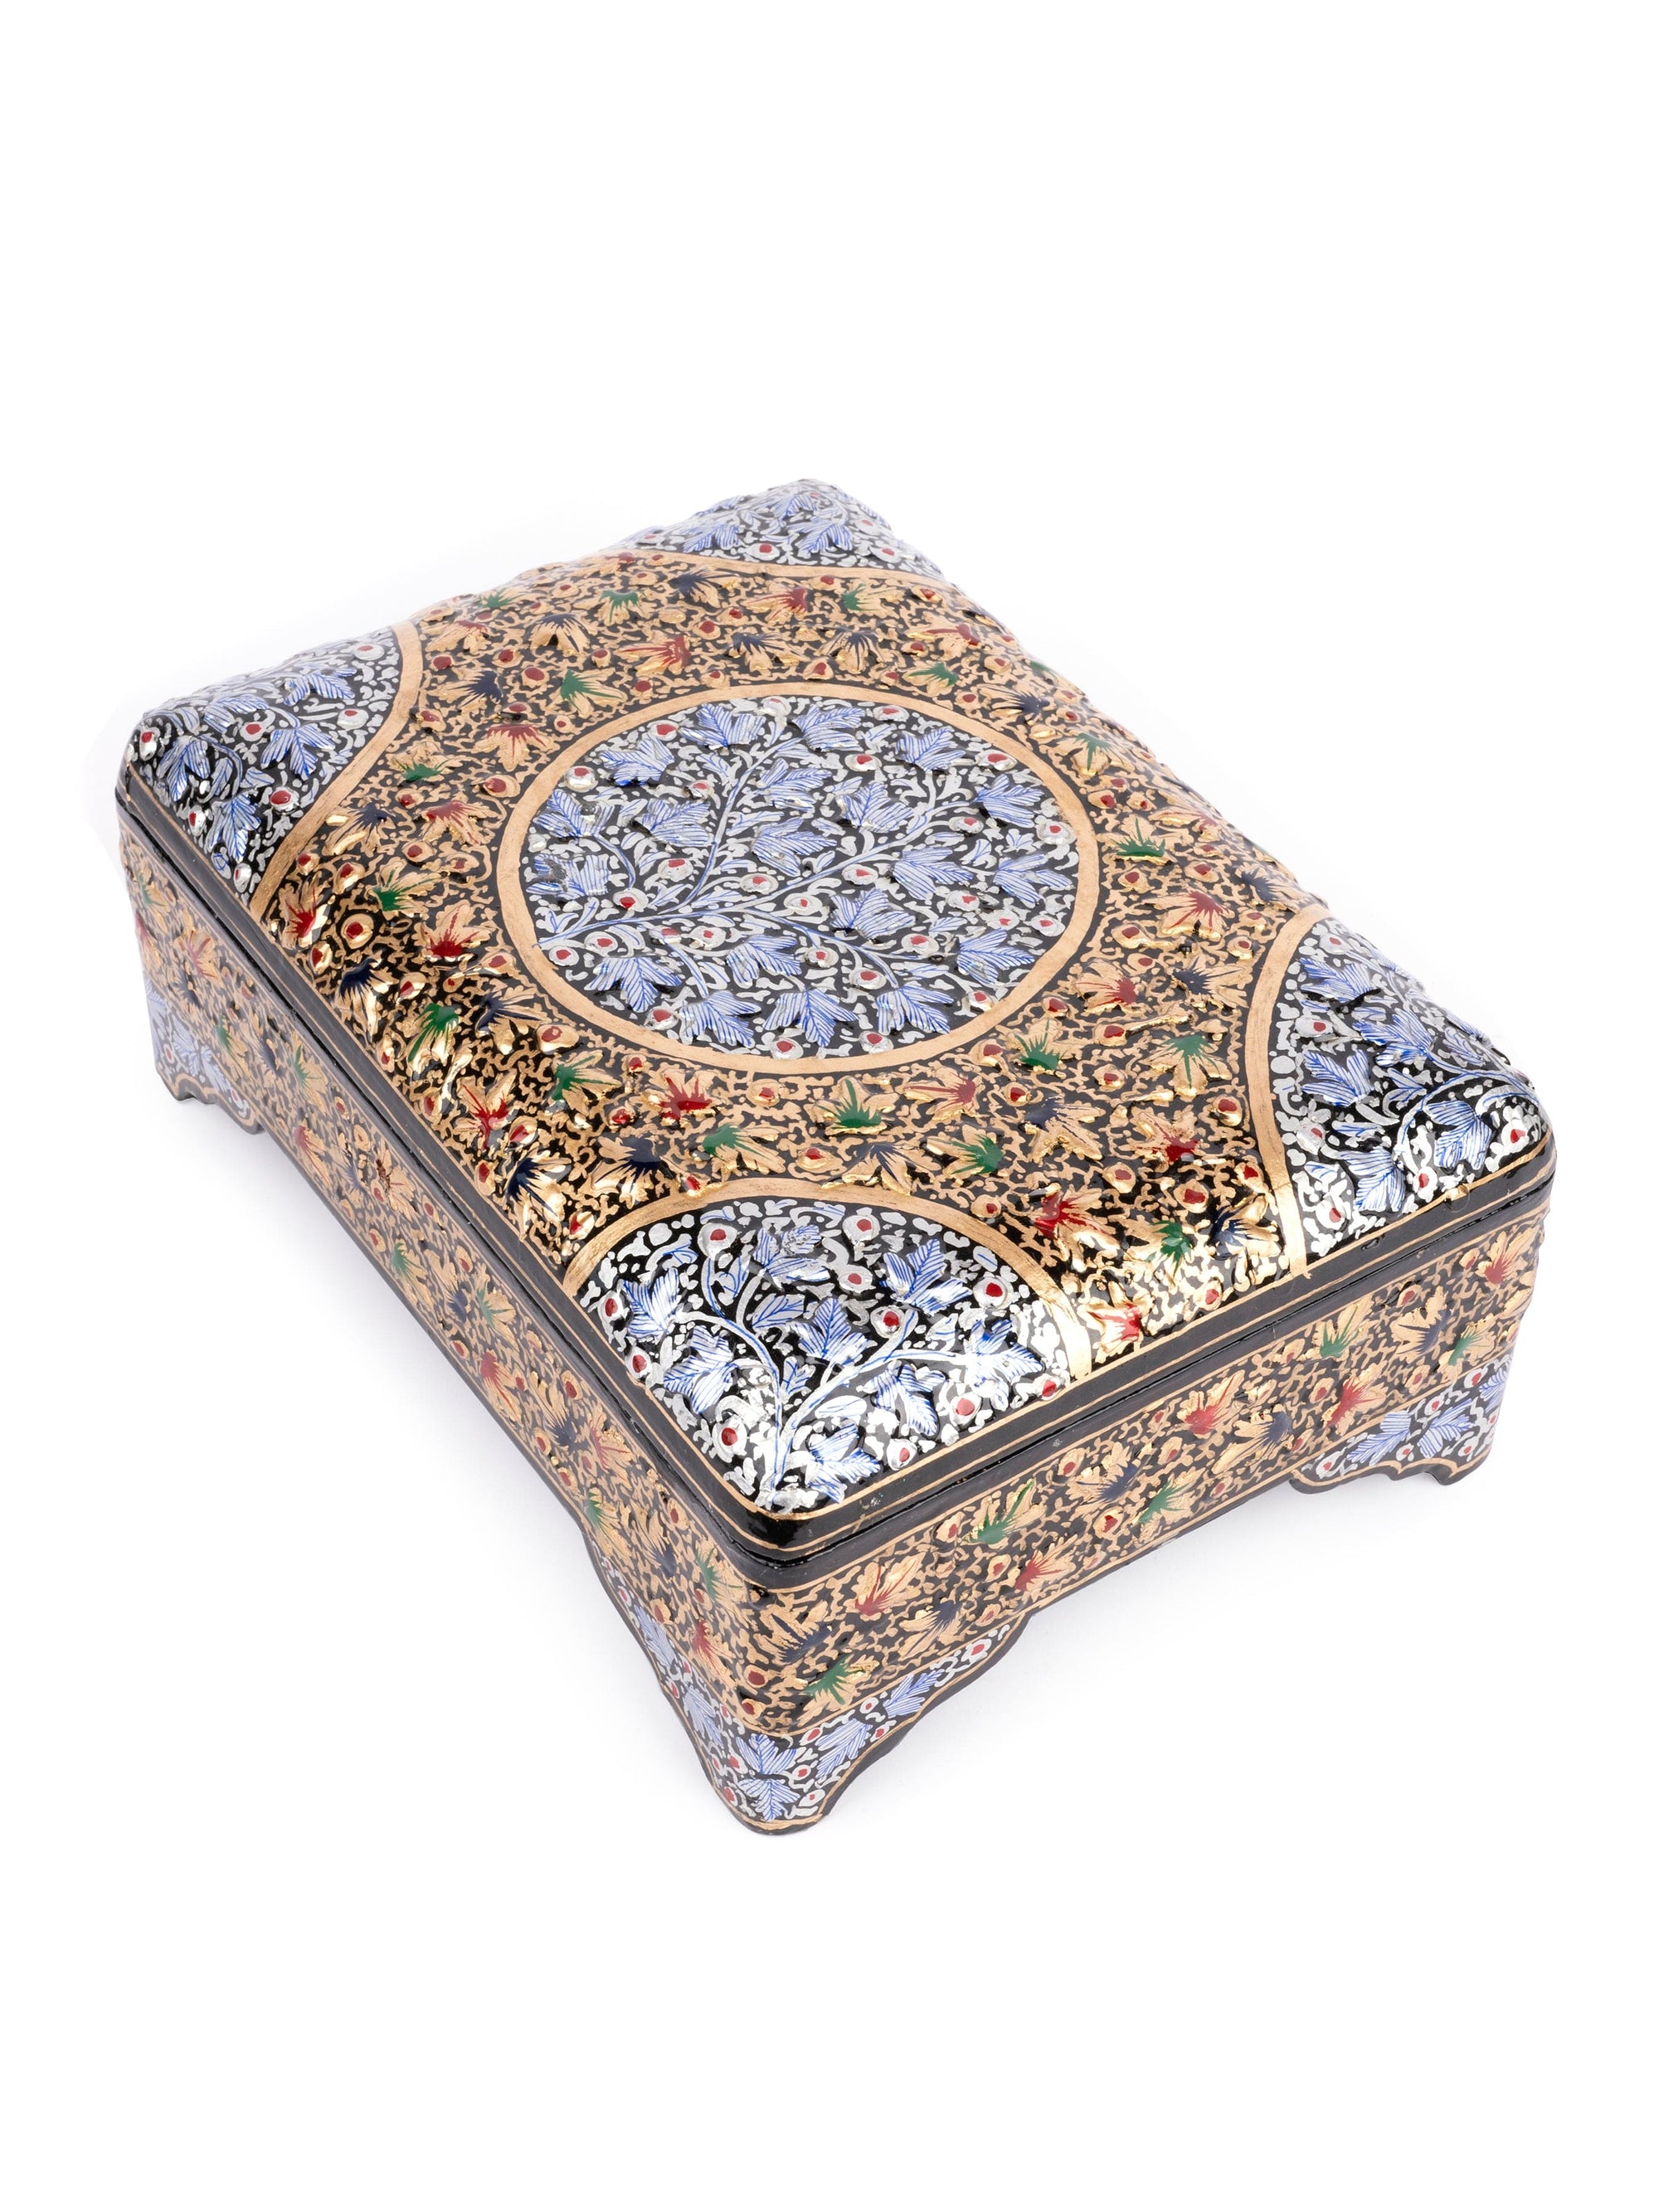 Bright and Colorful Paper Mache Storage Box for Multiuse - The Heritage Artifacts